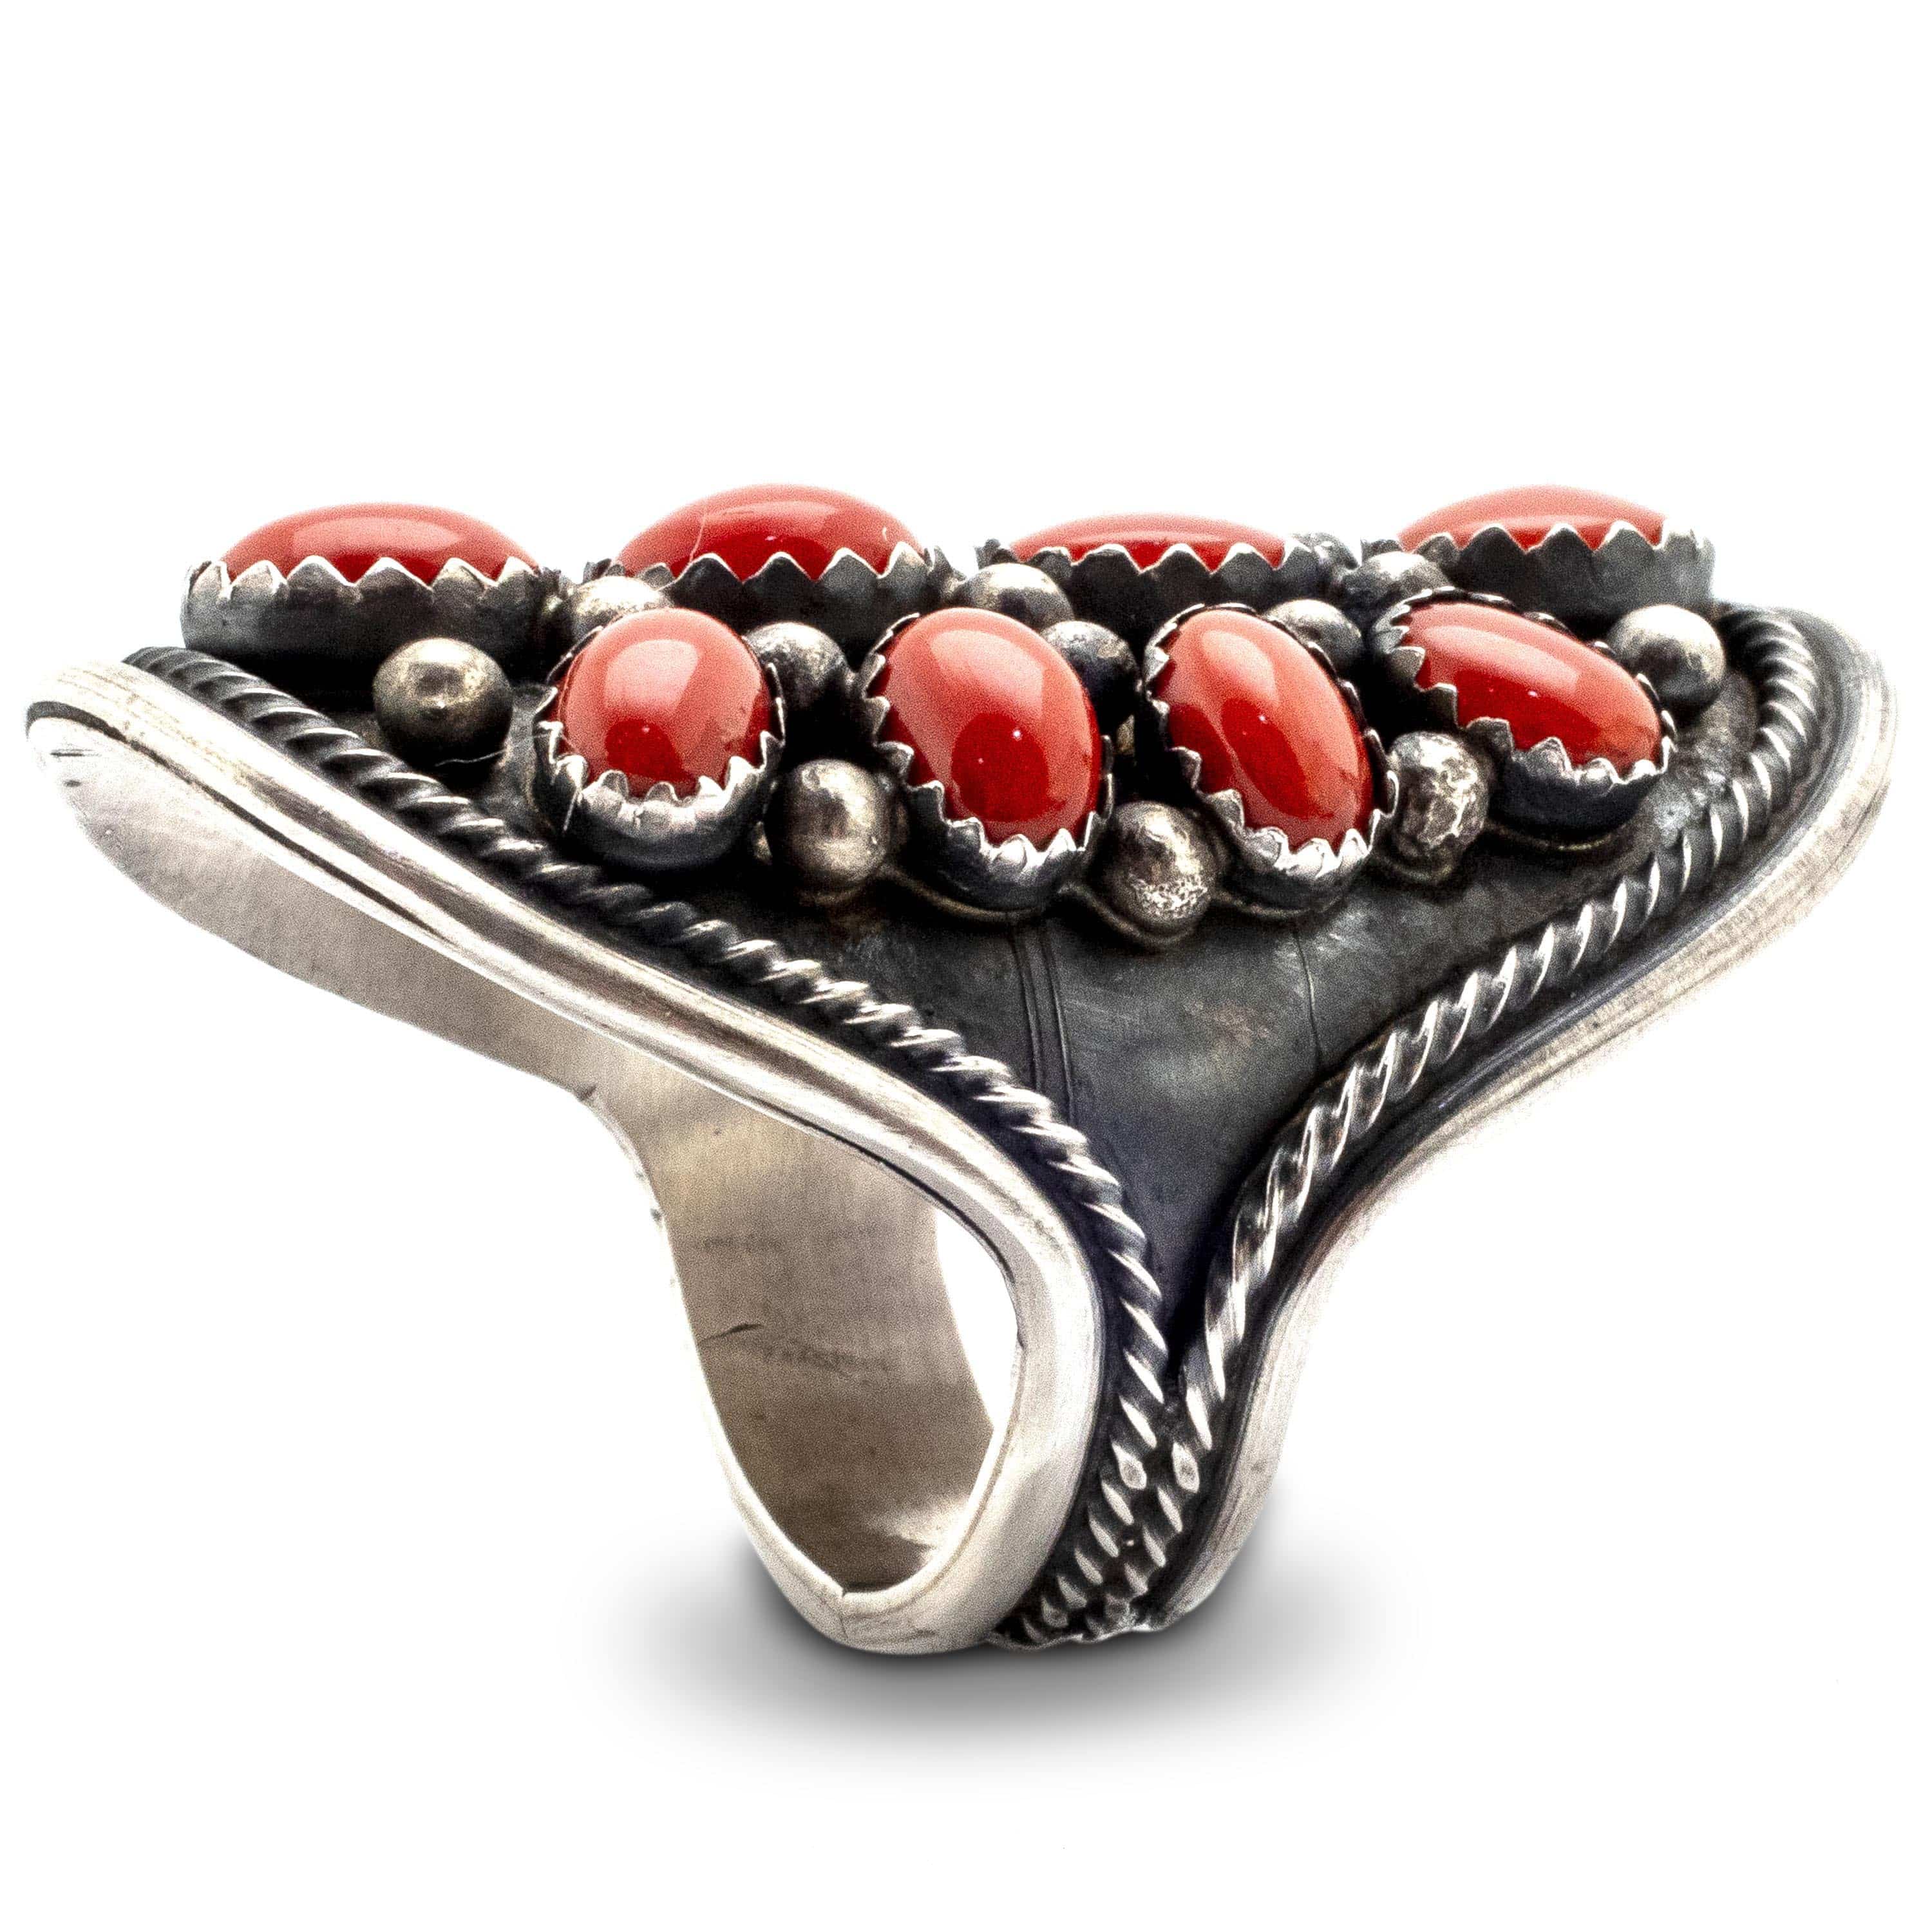 Kalifano Native American Jewelry 7 Paul Livingston Coral USA Native Amerian Made 925 Sterling Silver Ring NAR1800.005.7